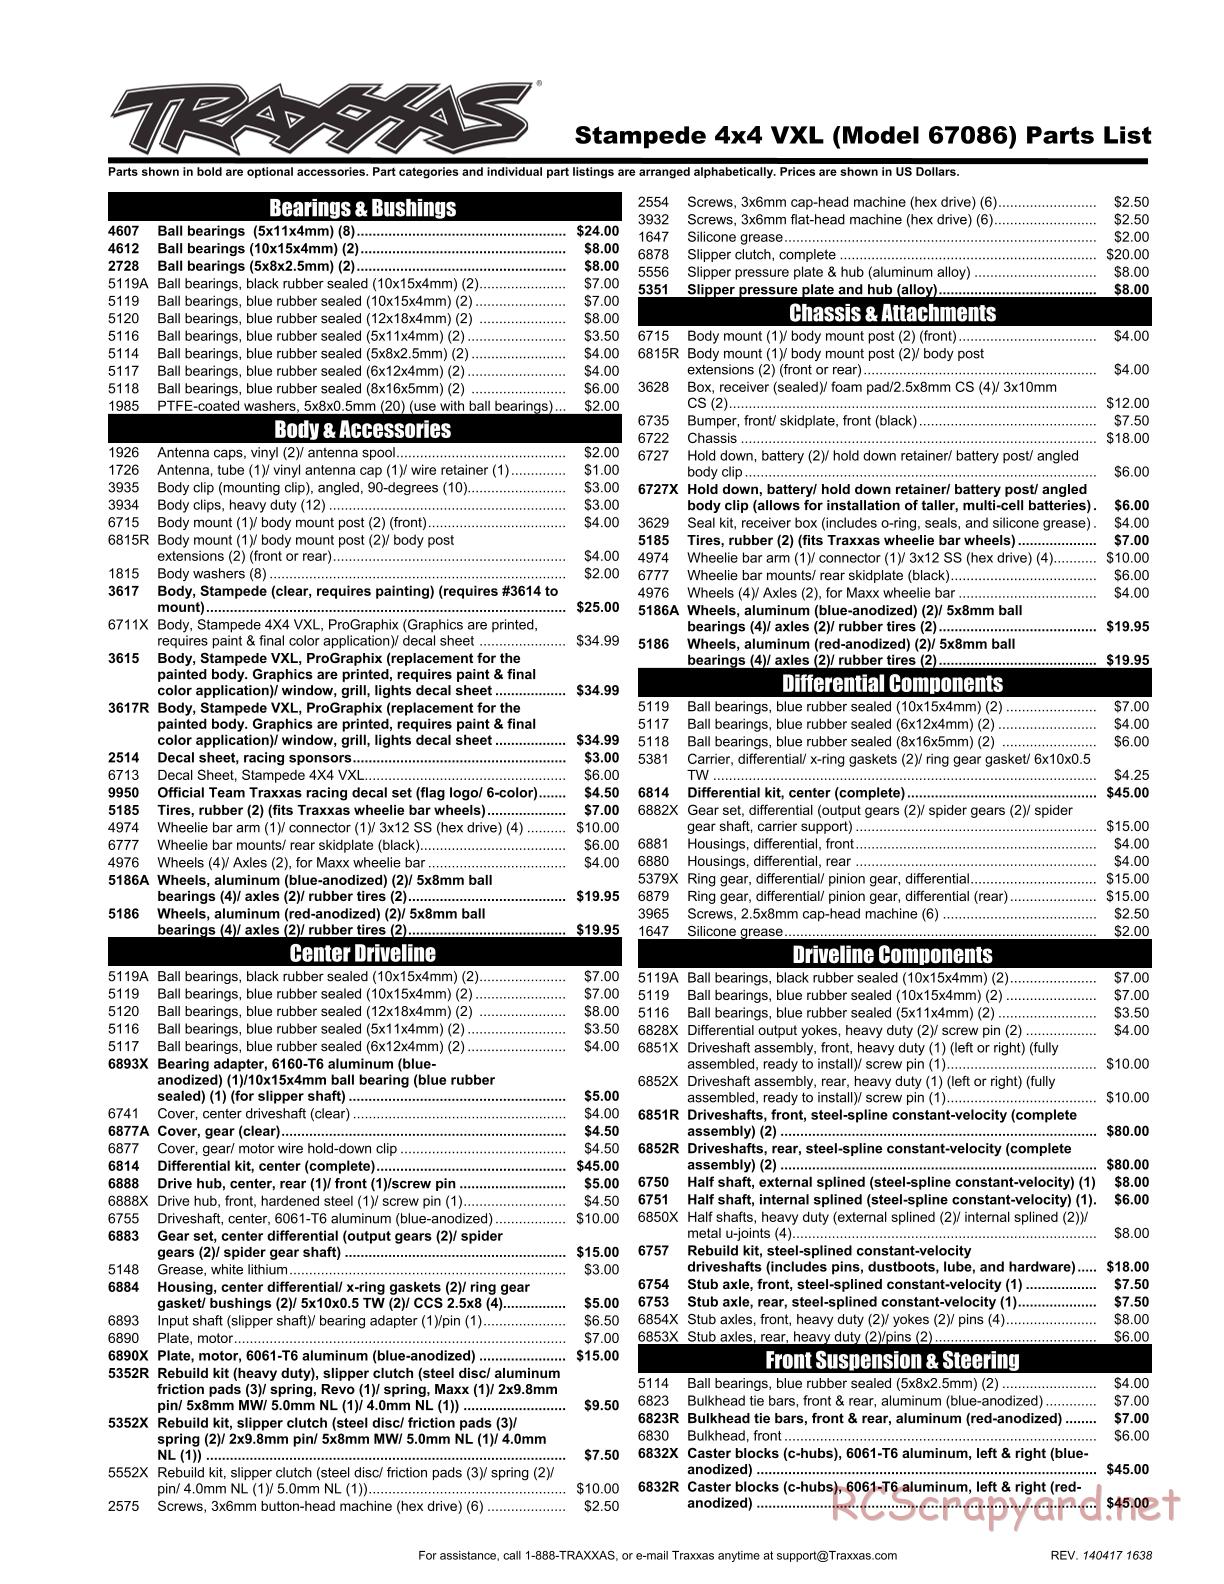 Traxxas - Stampede 4x4 VXL (2014) - Parts List - Page 1